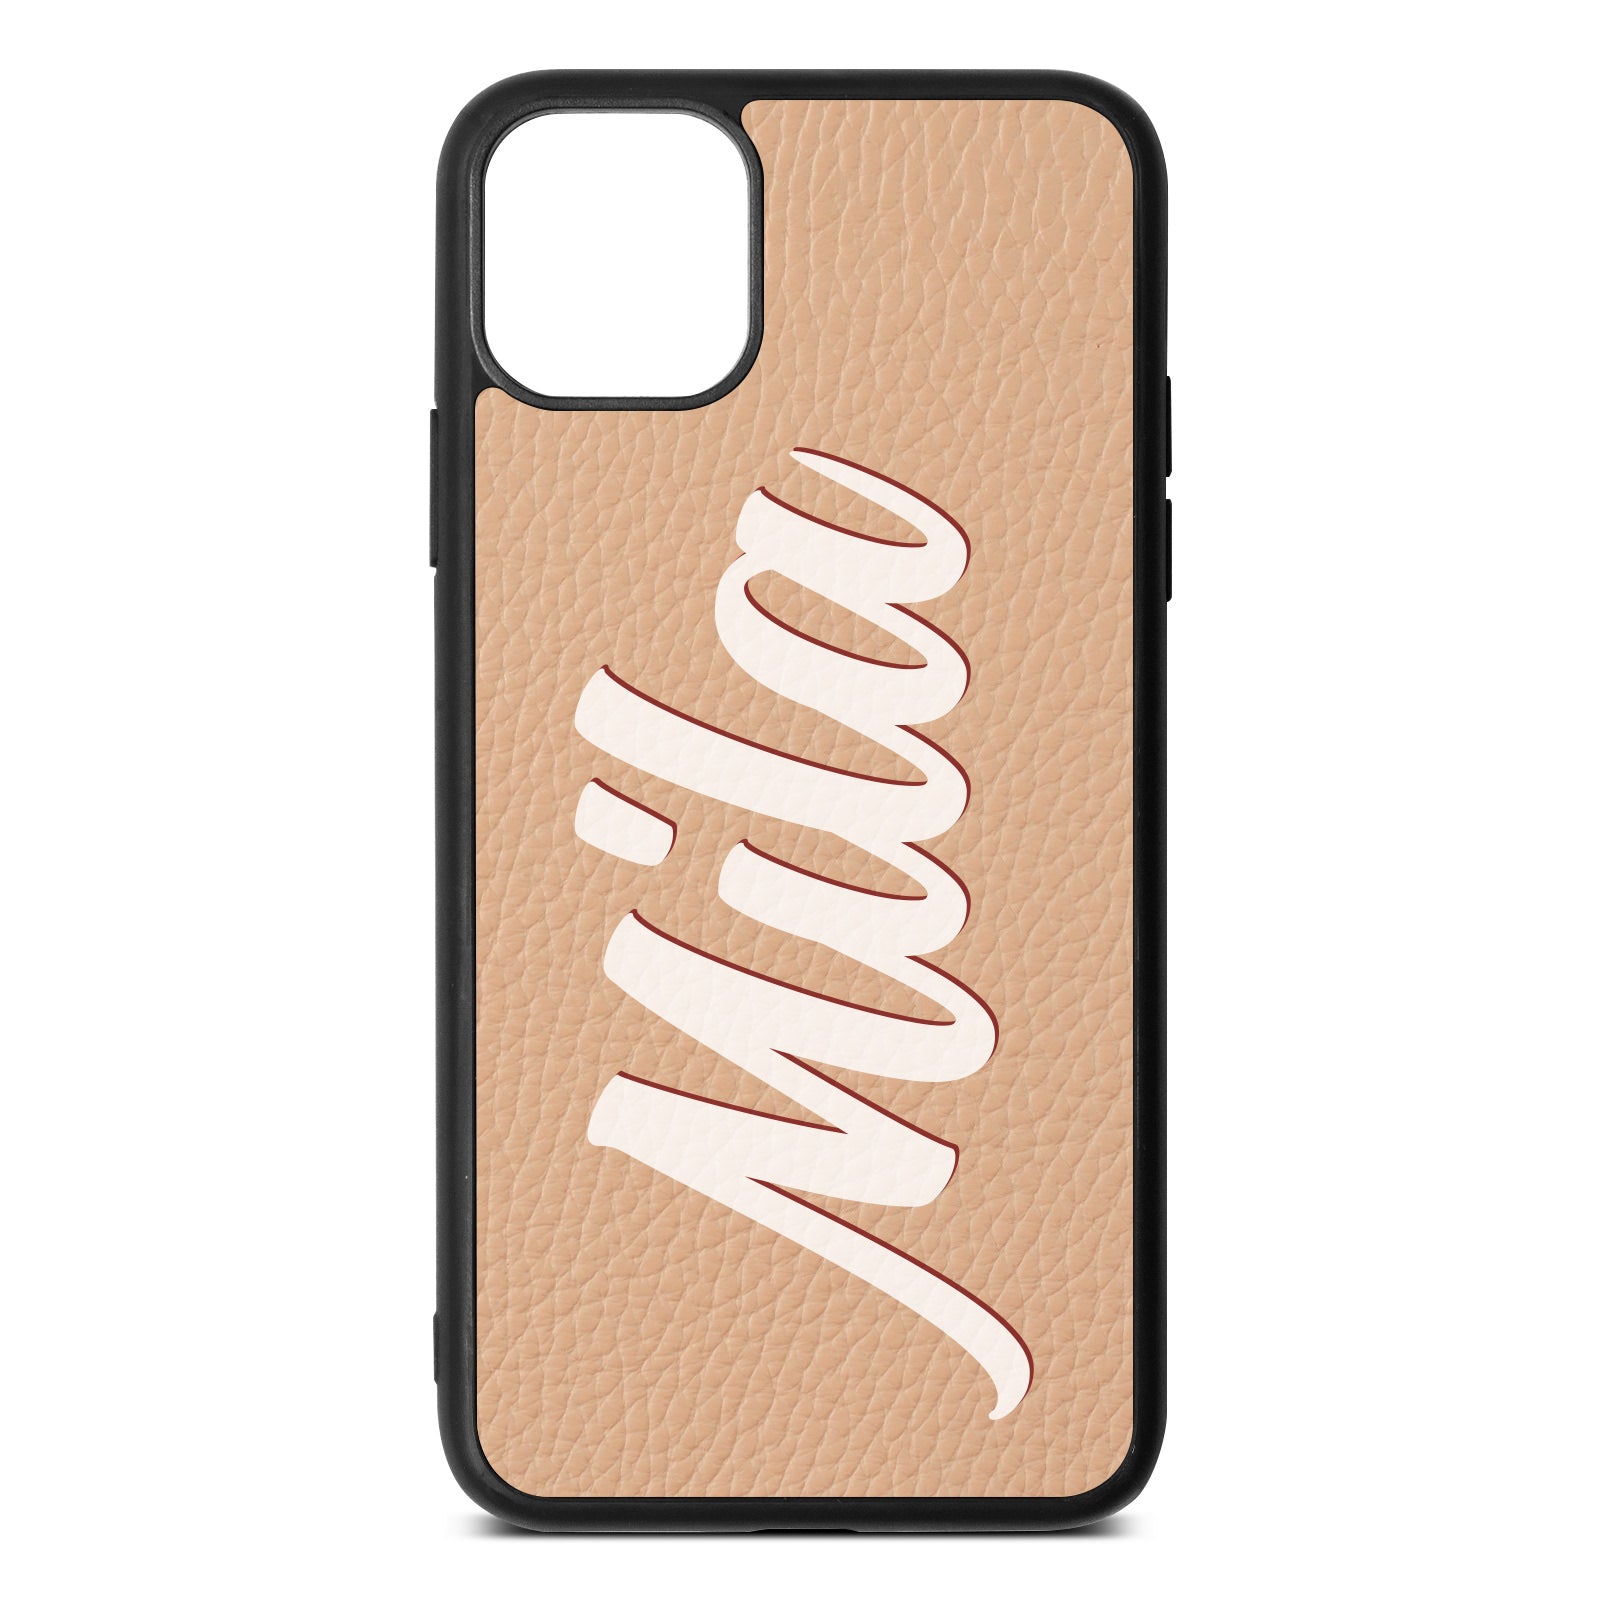 iPhone 11 Pro Max Nude Pebble Leather Case